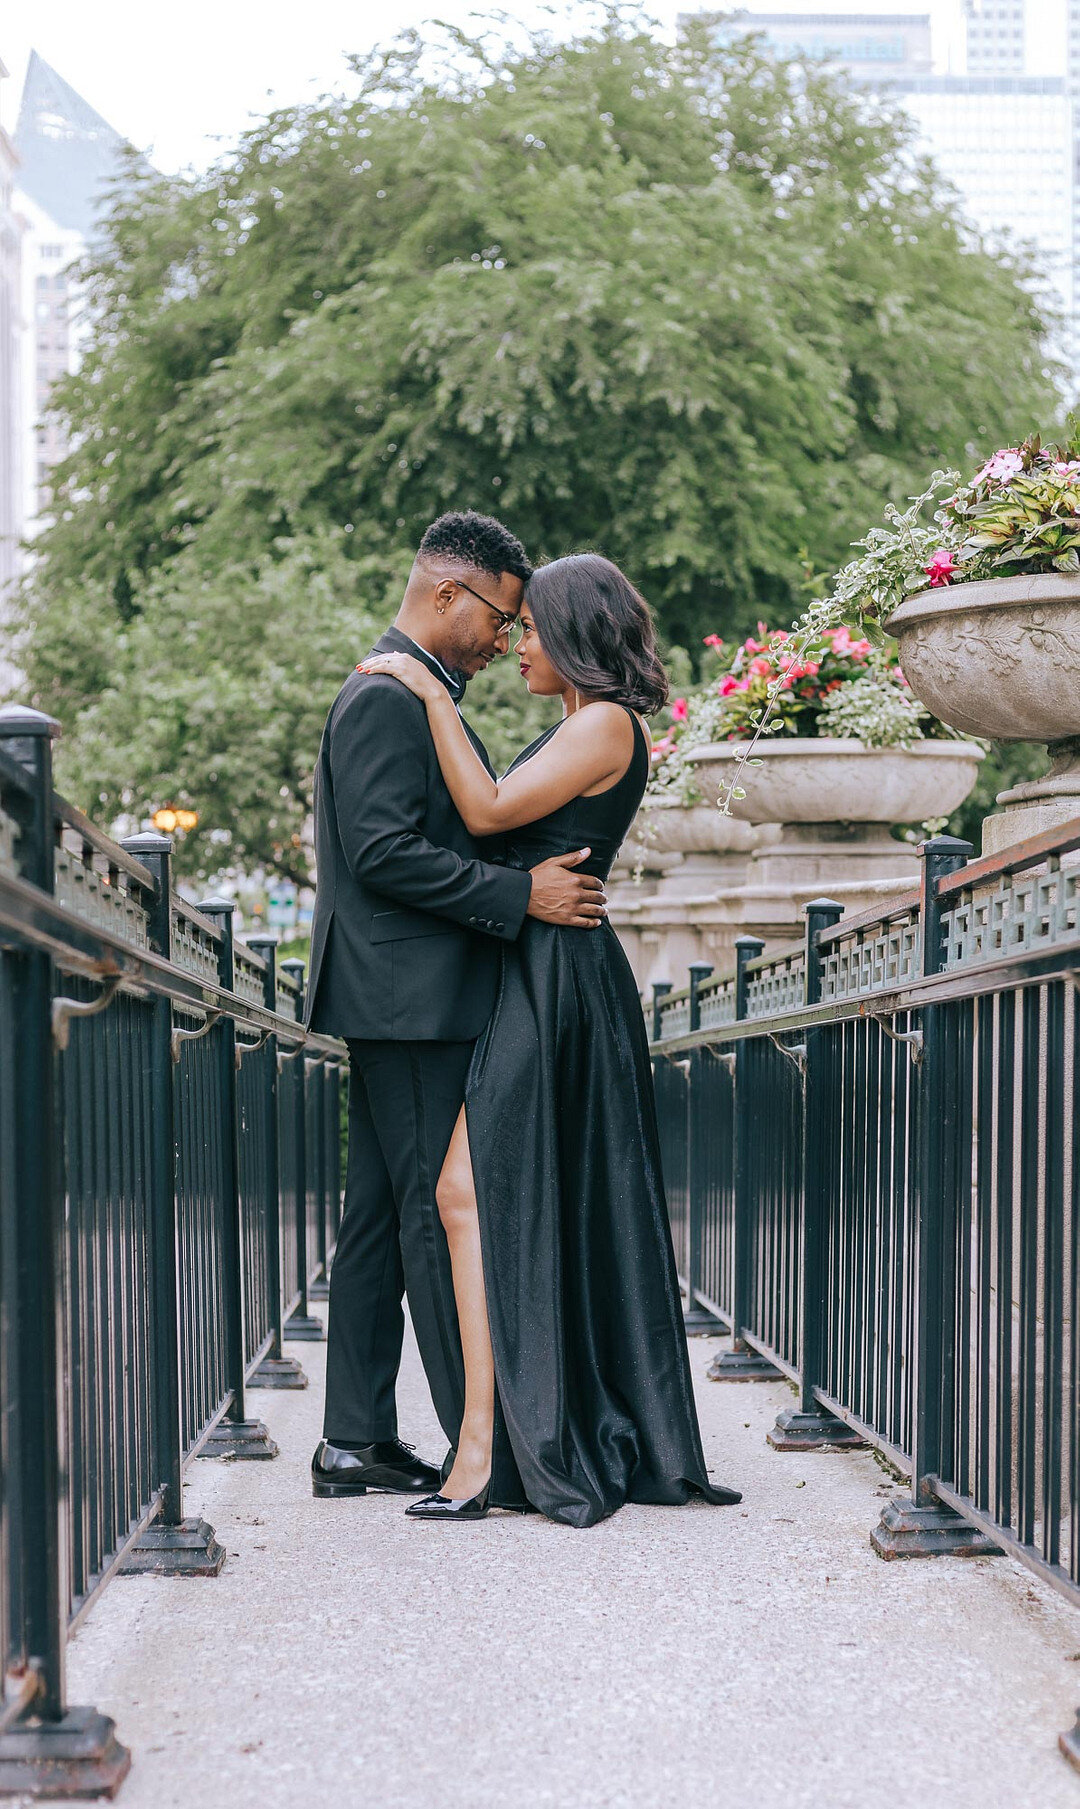 High Fashion Chicago Engagement Session captured by Rae Marcel Photography featured on CHI thee WED